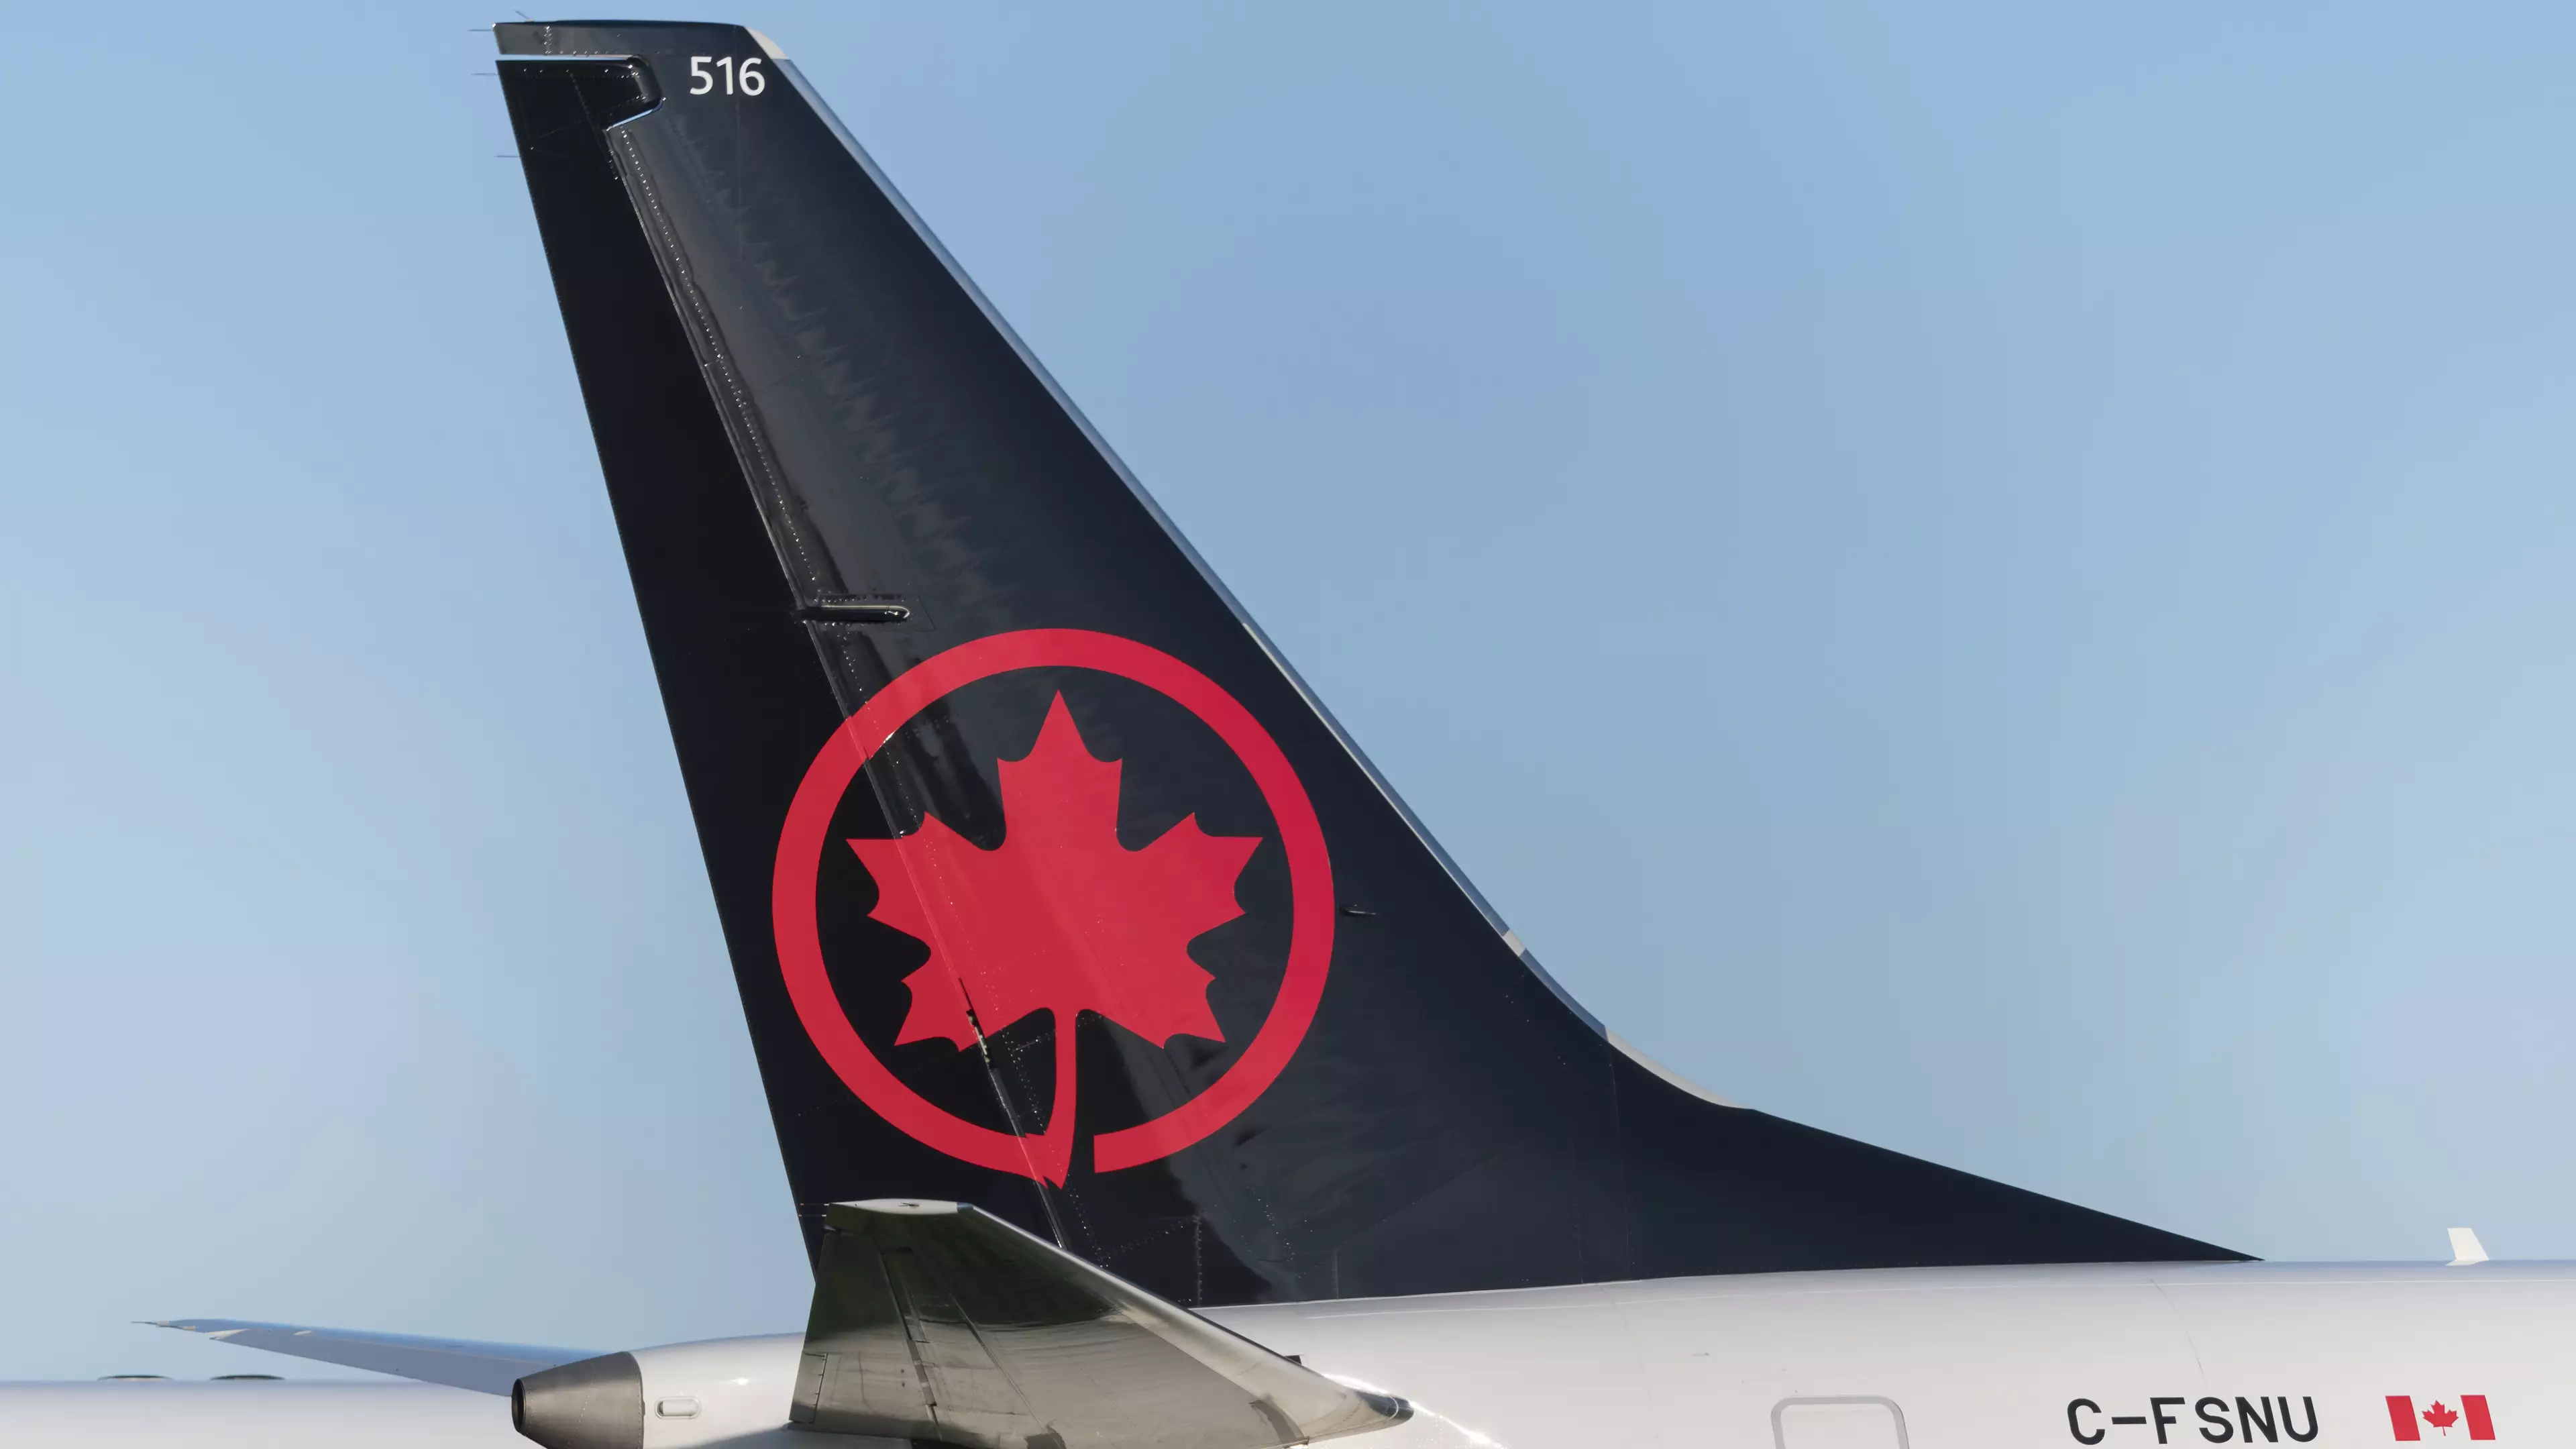 Air Canada has confirmed the woman's account.